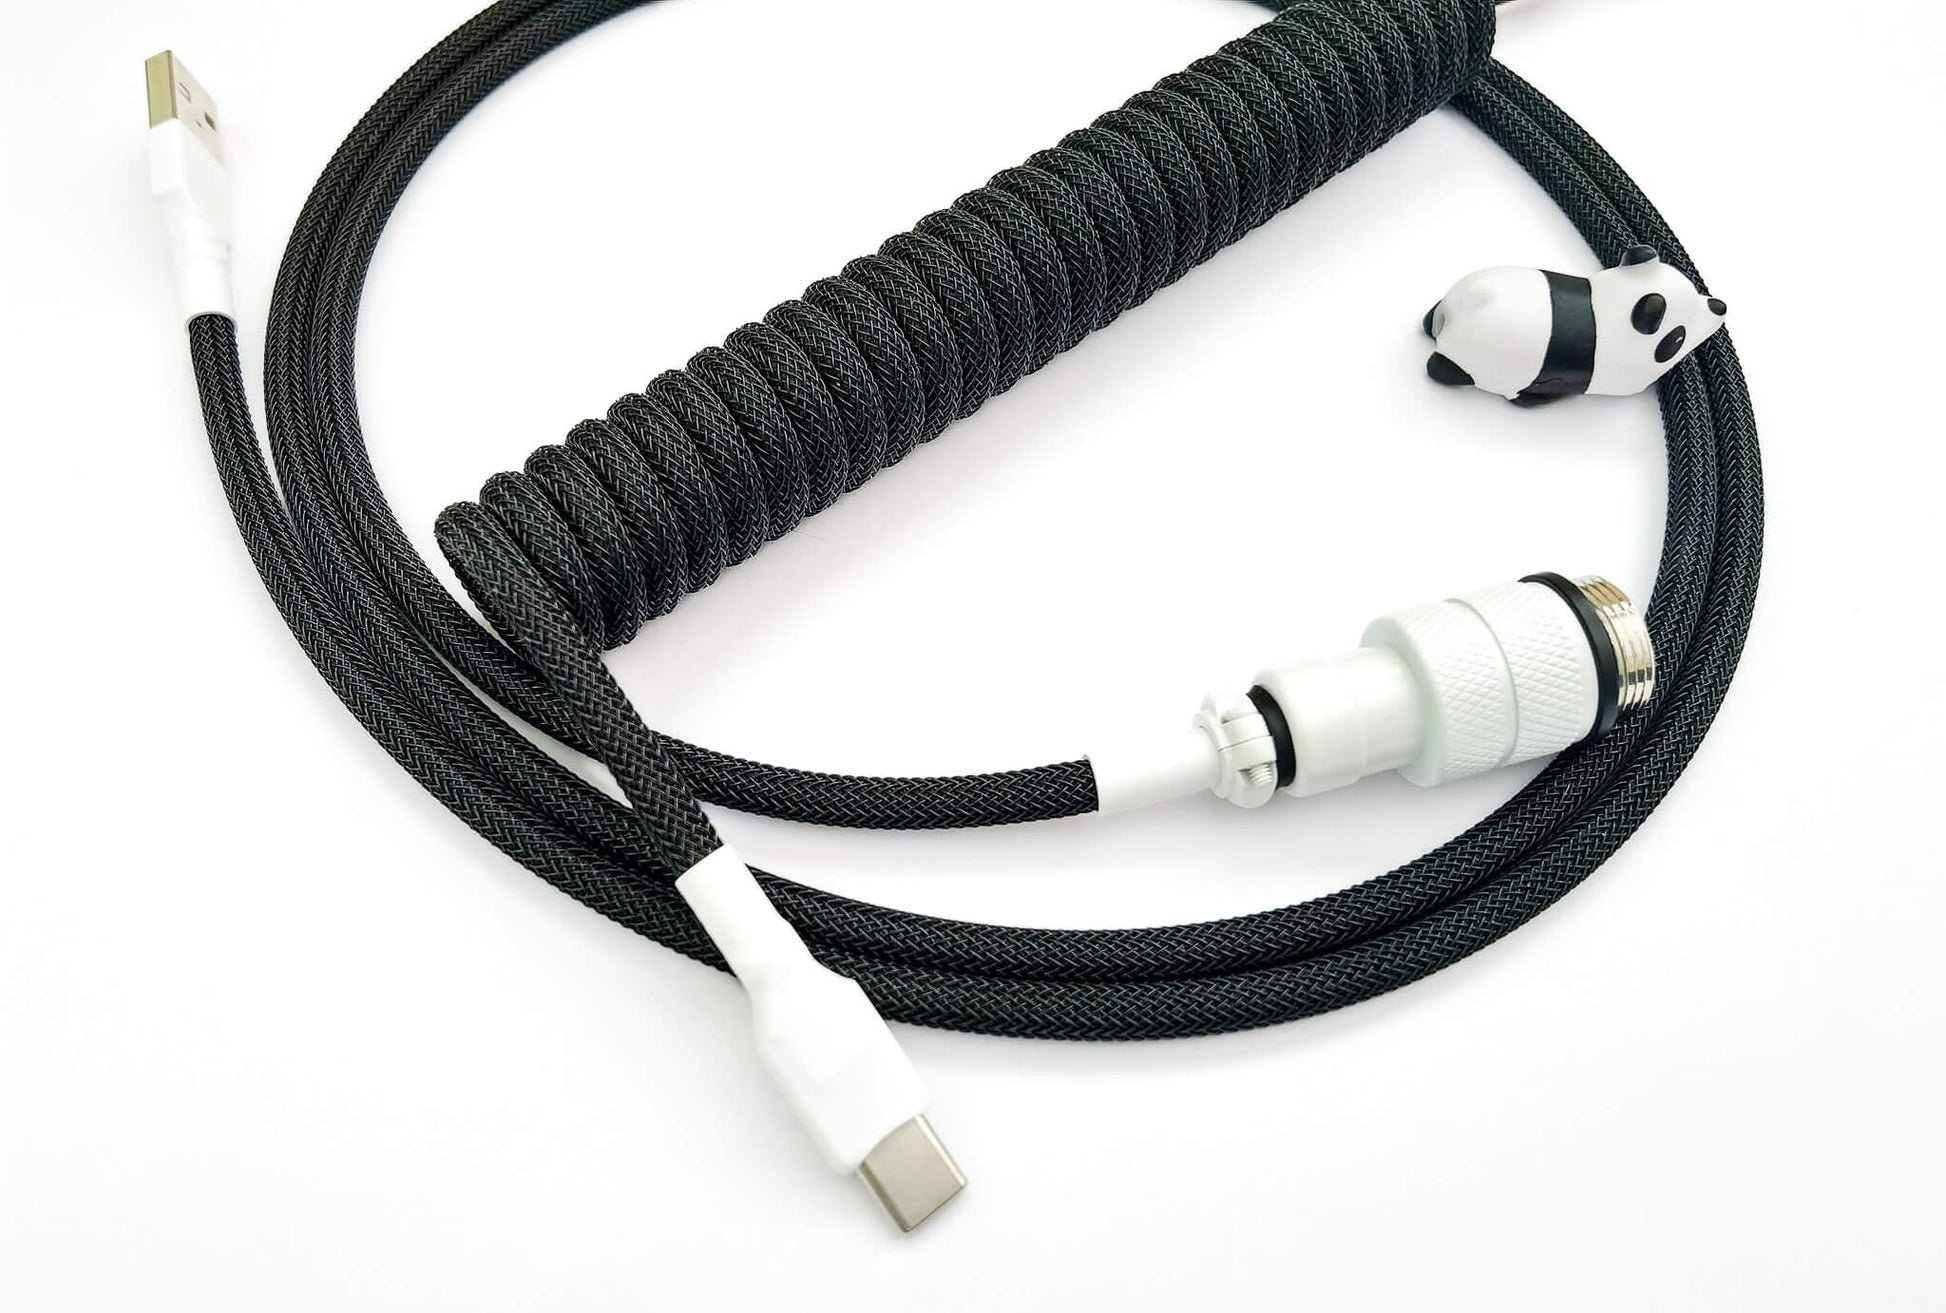 wob USB C cable